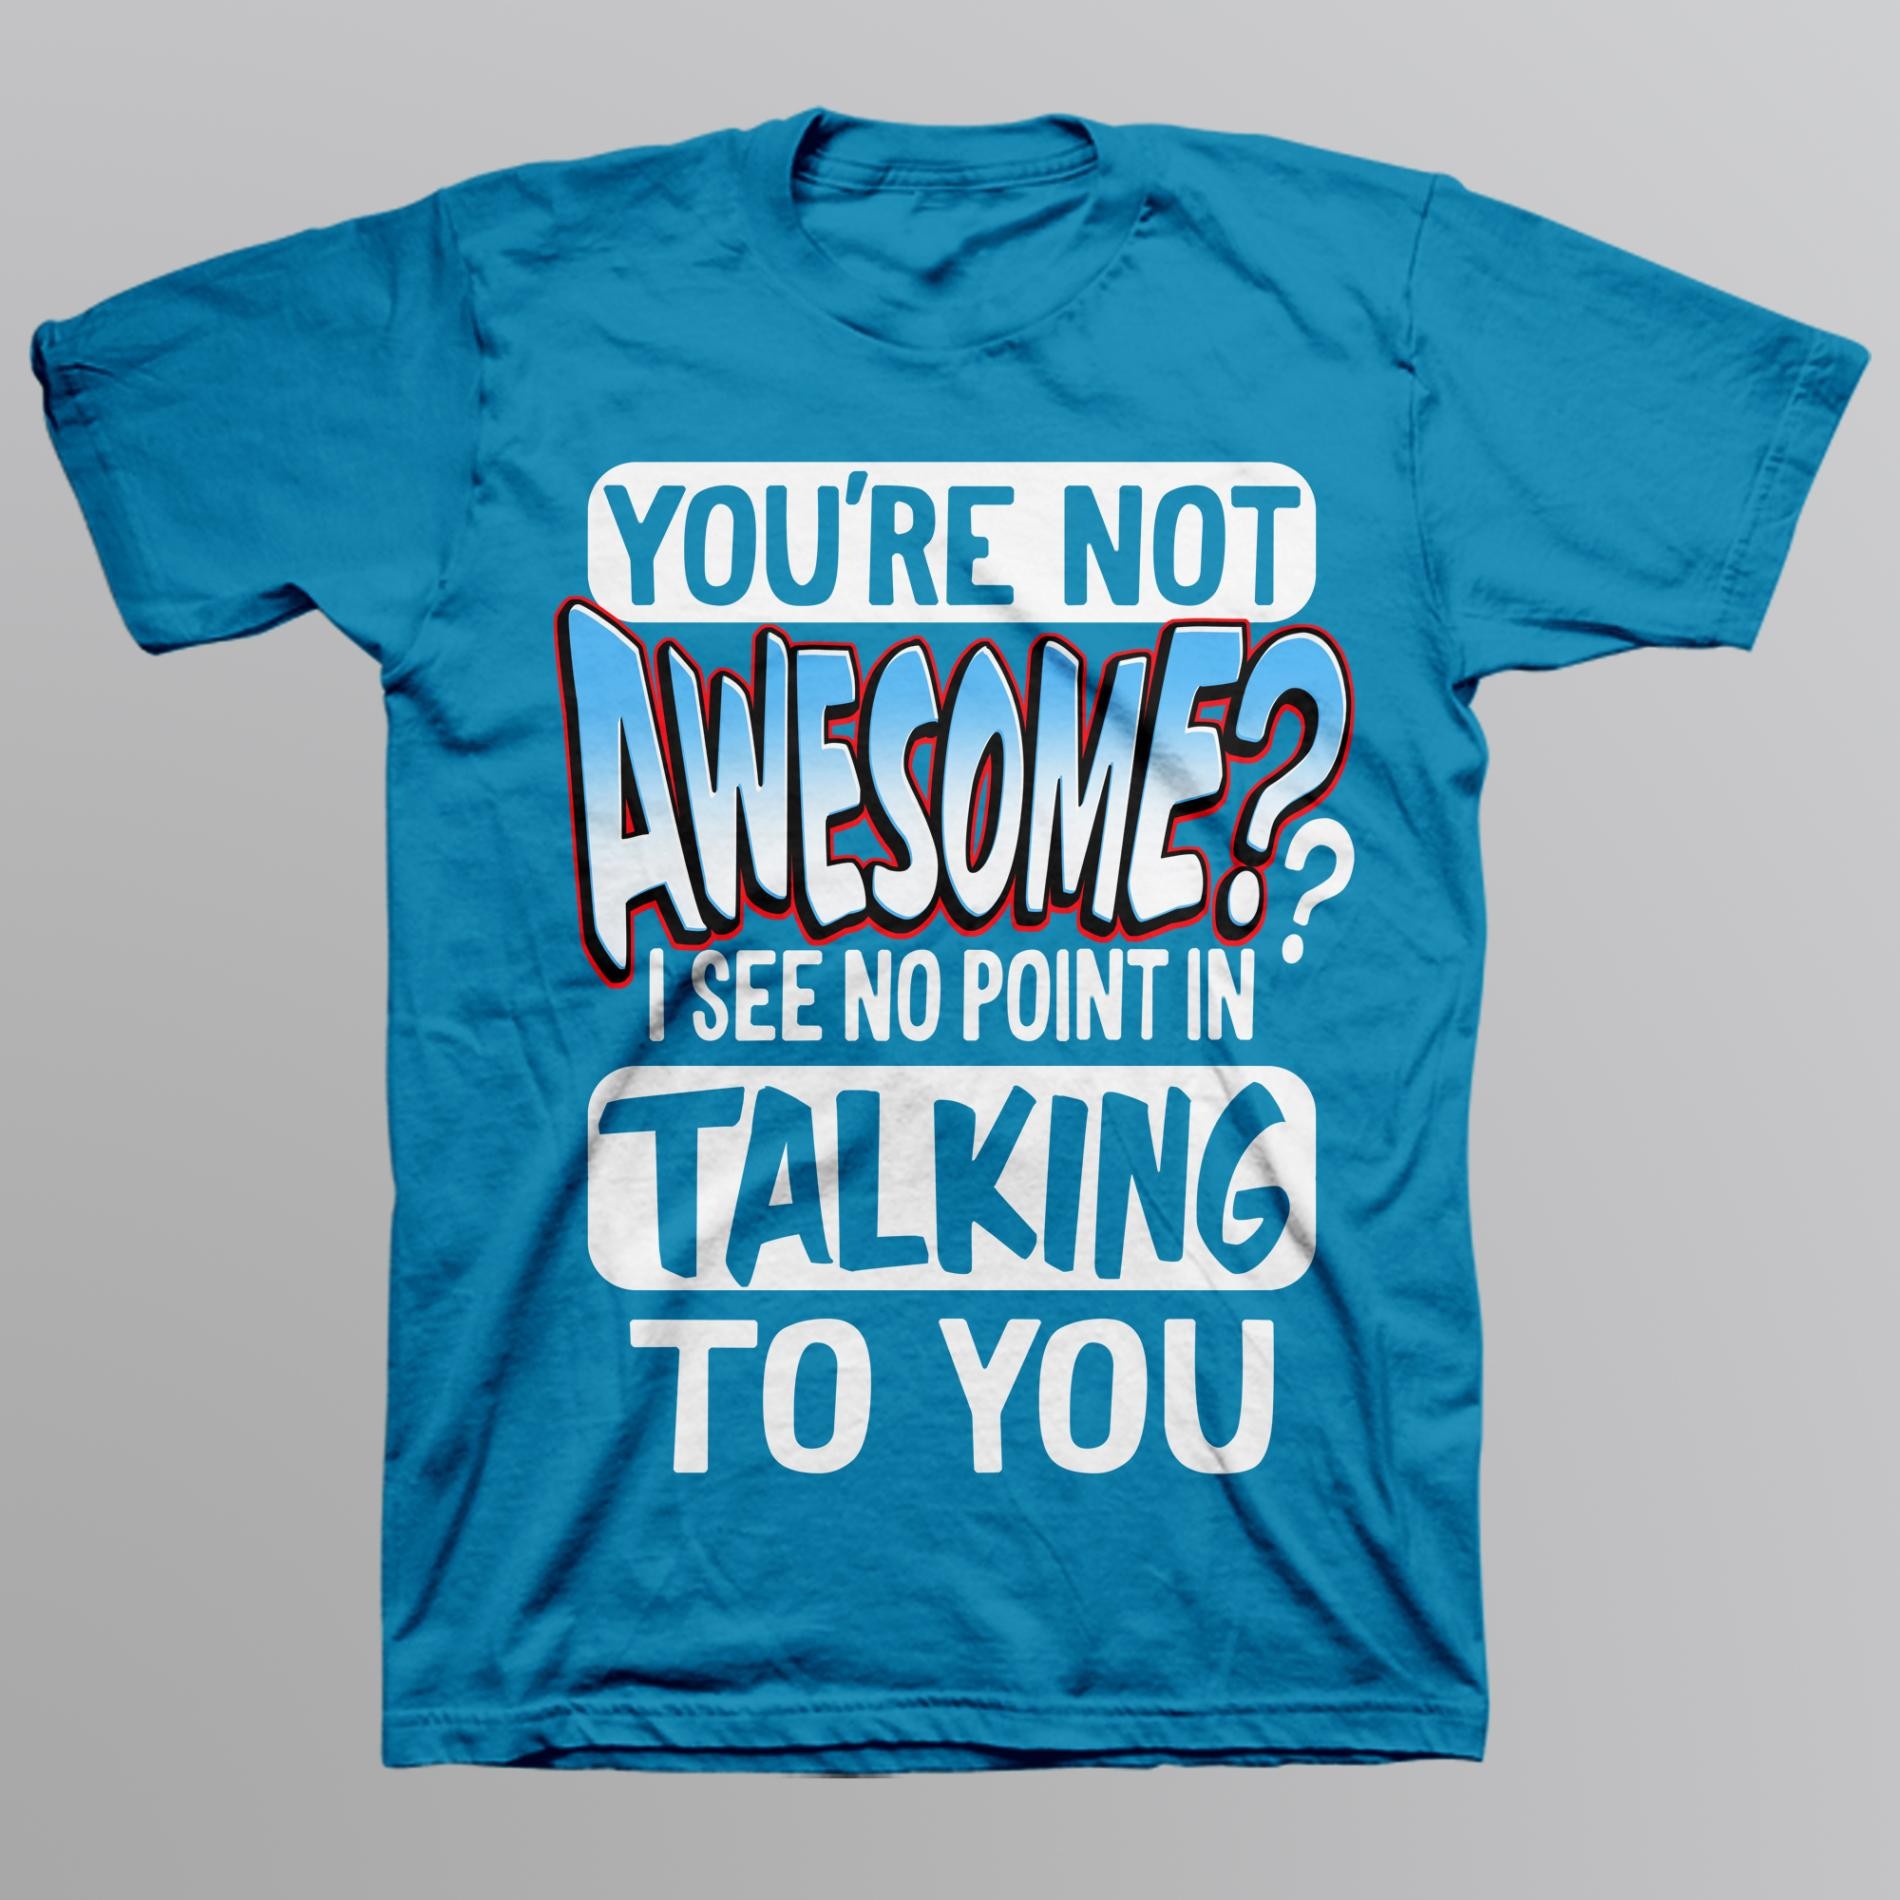 Route 66 Boy's Graphic T-Shirt - You're Not Awesome